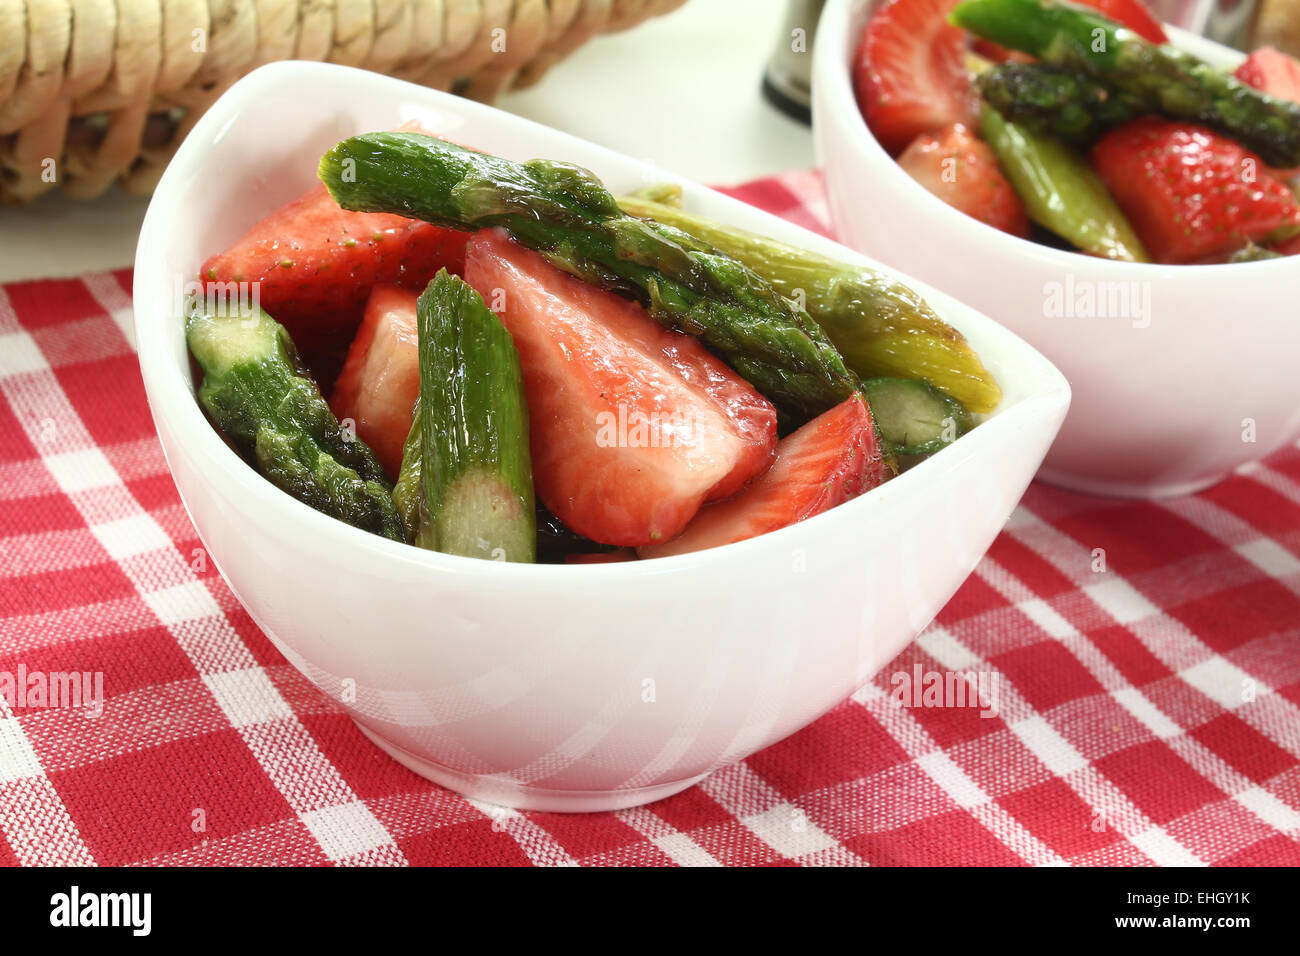 asparagus salad with strawberries Stock Photo